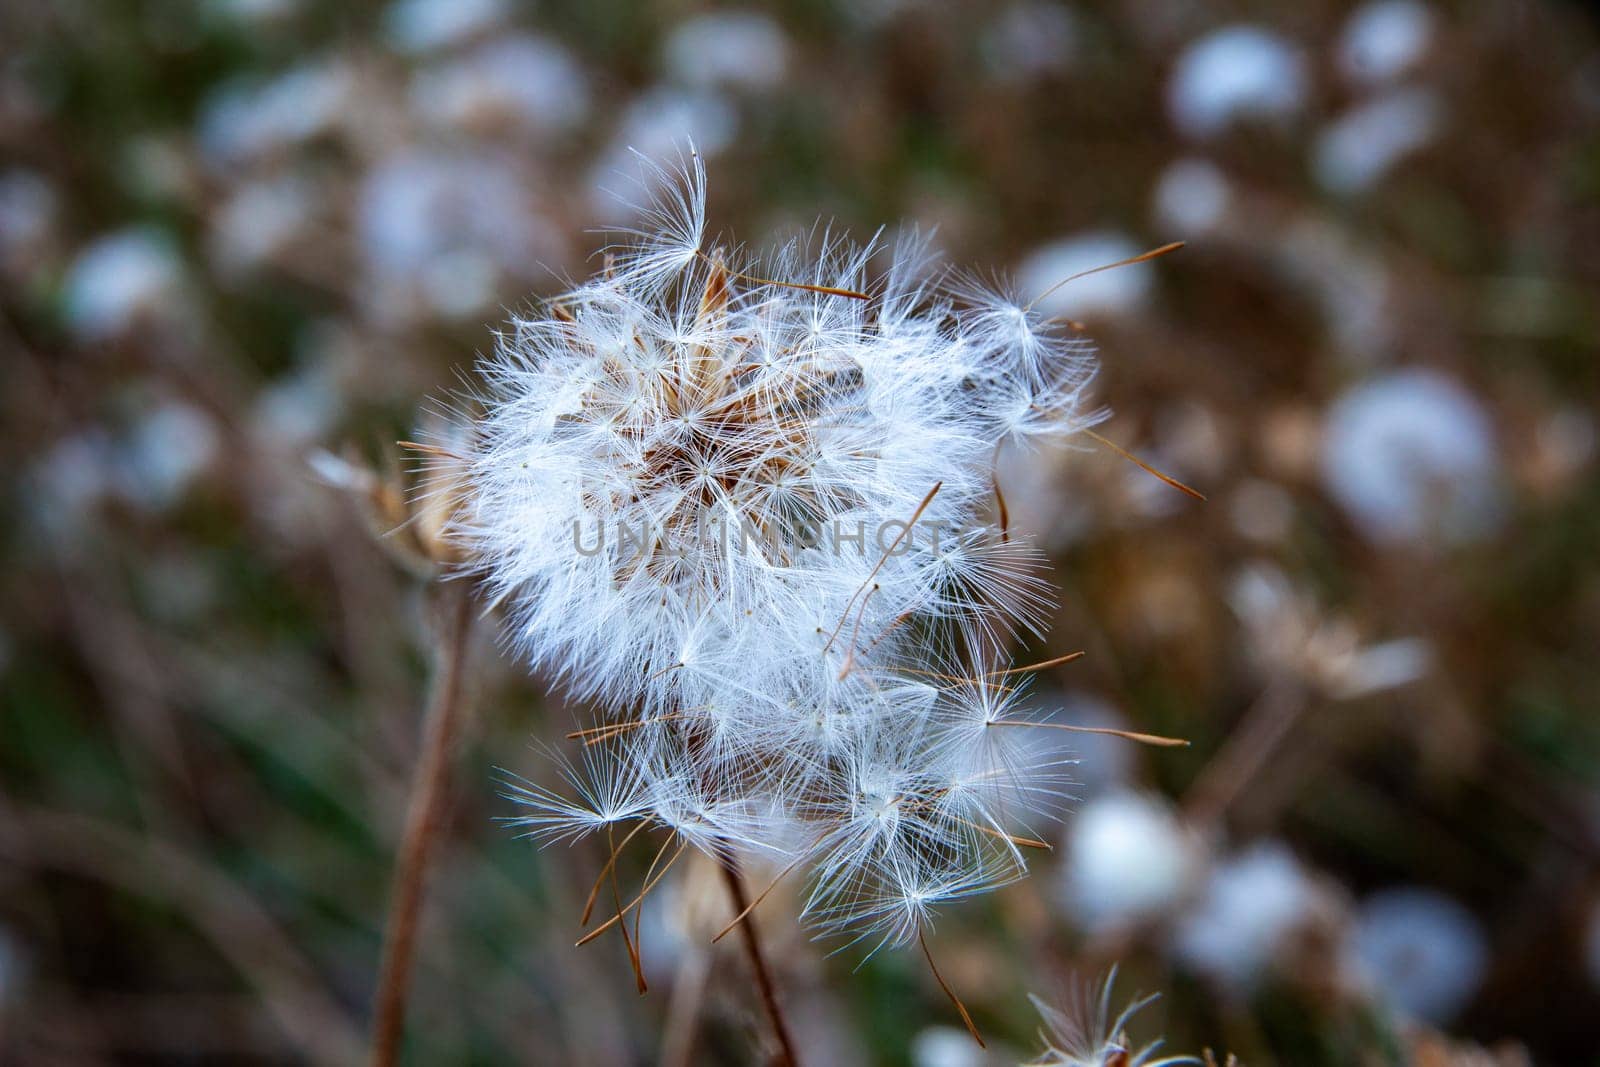 Dandelion head with many stamens stirred by the wind. by EdVal